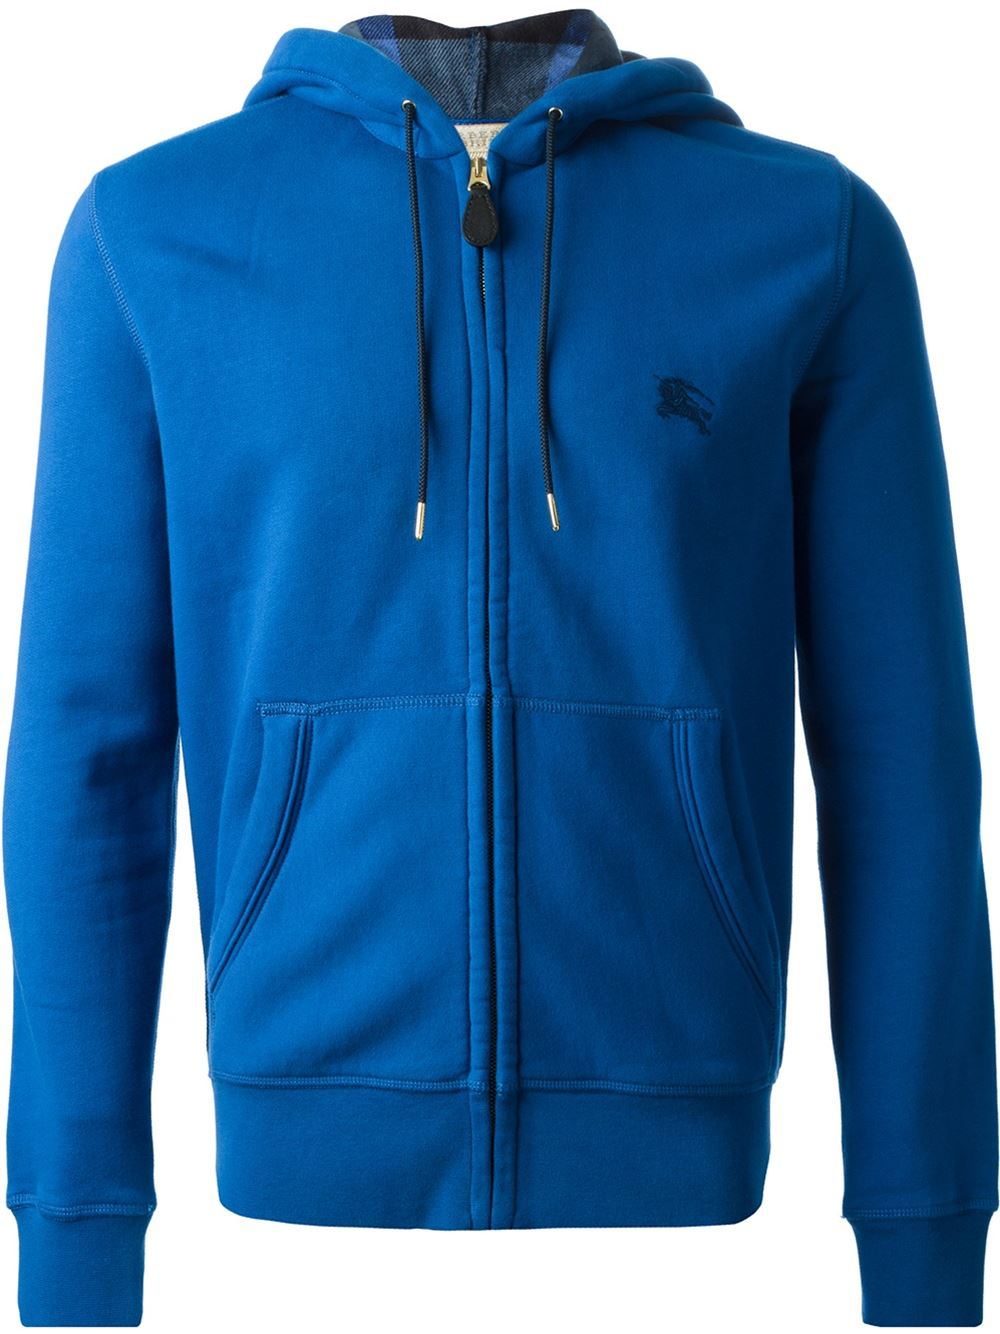 Burberry Brit Zipped Hoodie in Blue for Men - Lyst